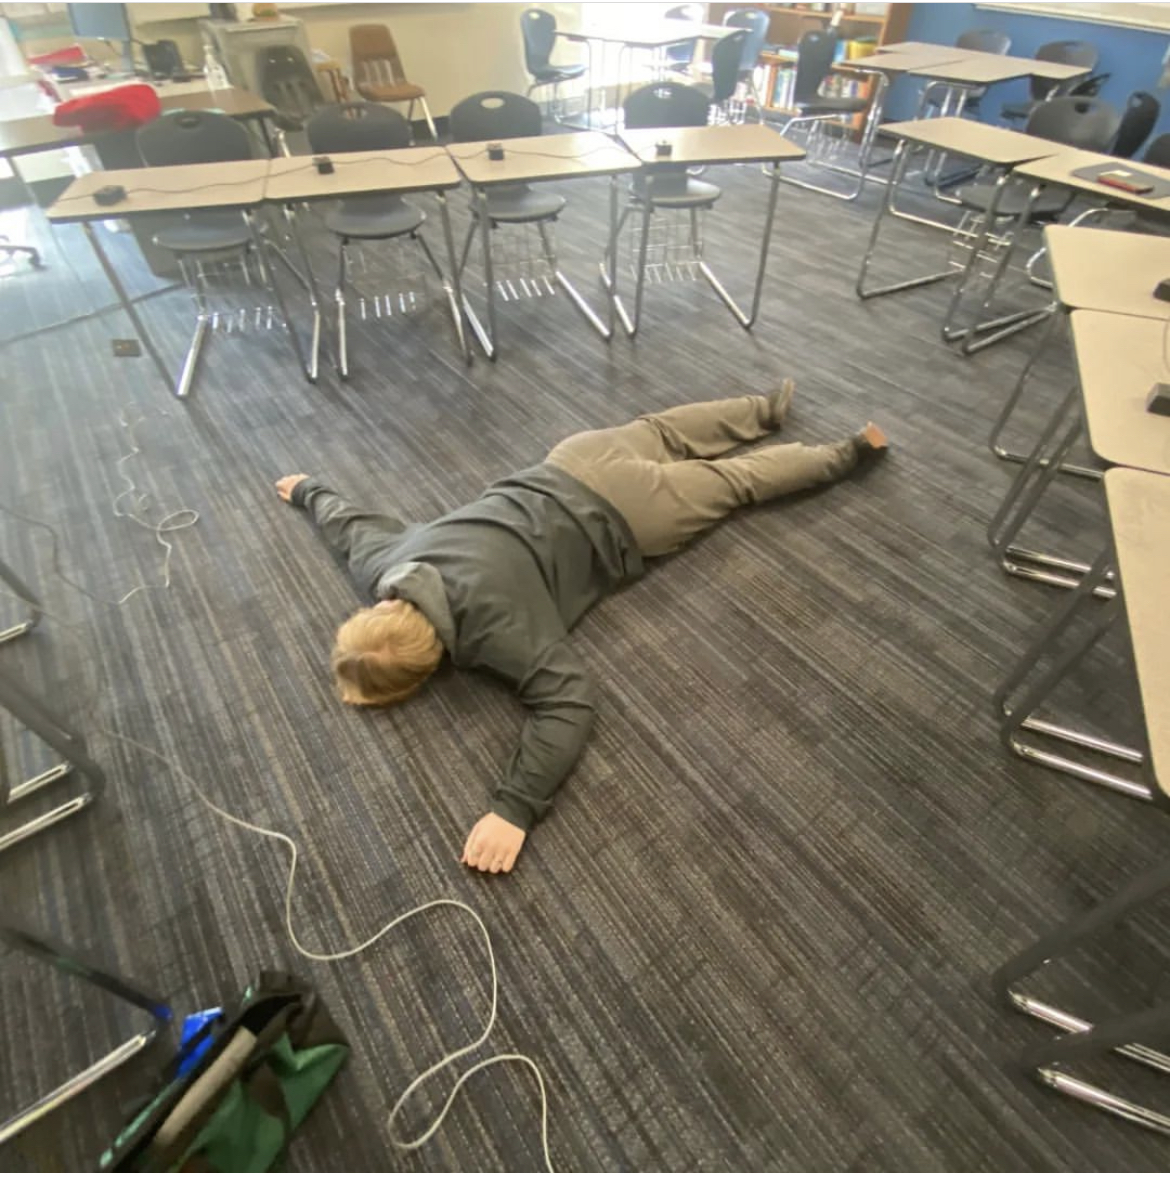 Junior Connor Farnsworth lays down, exhausted after the teams first competition of the year. South High took 6th place in the Parkway Academic Kickoff Tournament on Oct. 7.  Courtesy of @pshscholarbowl on Instagram.